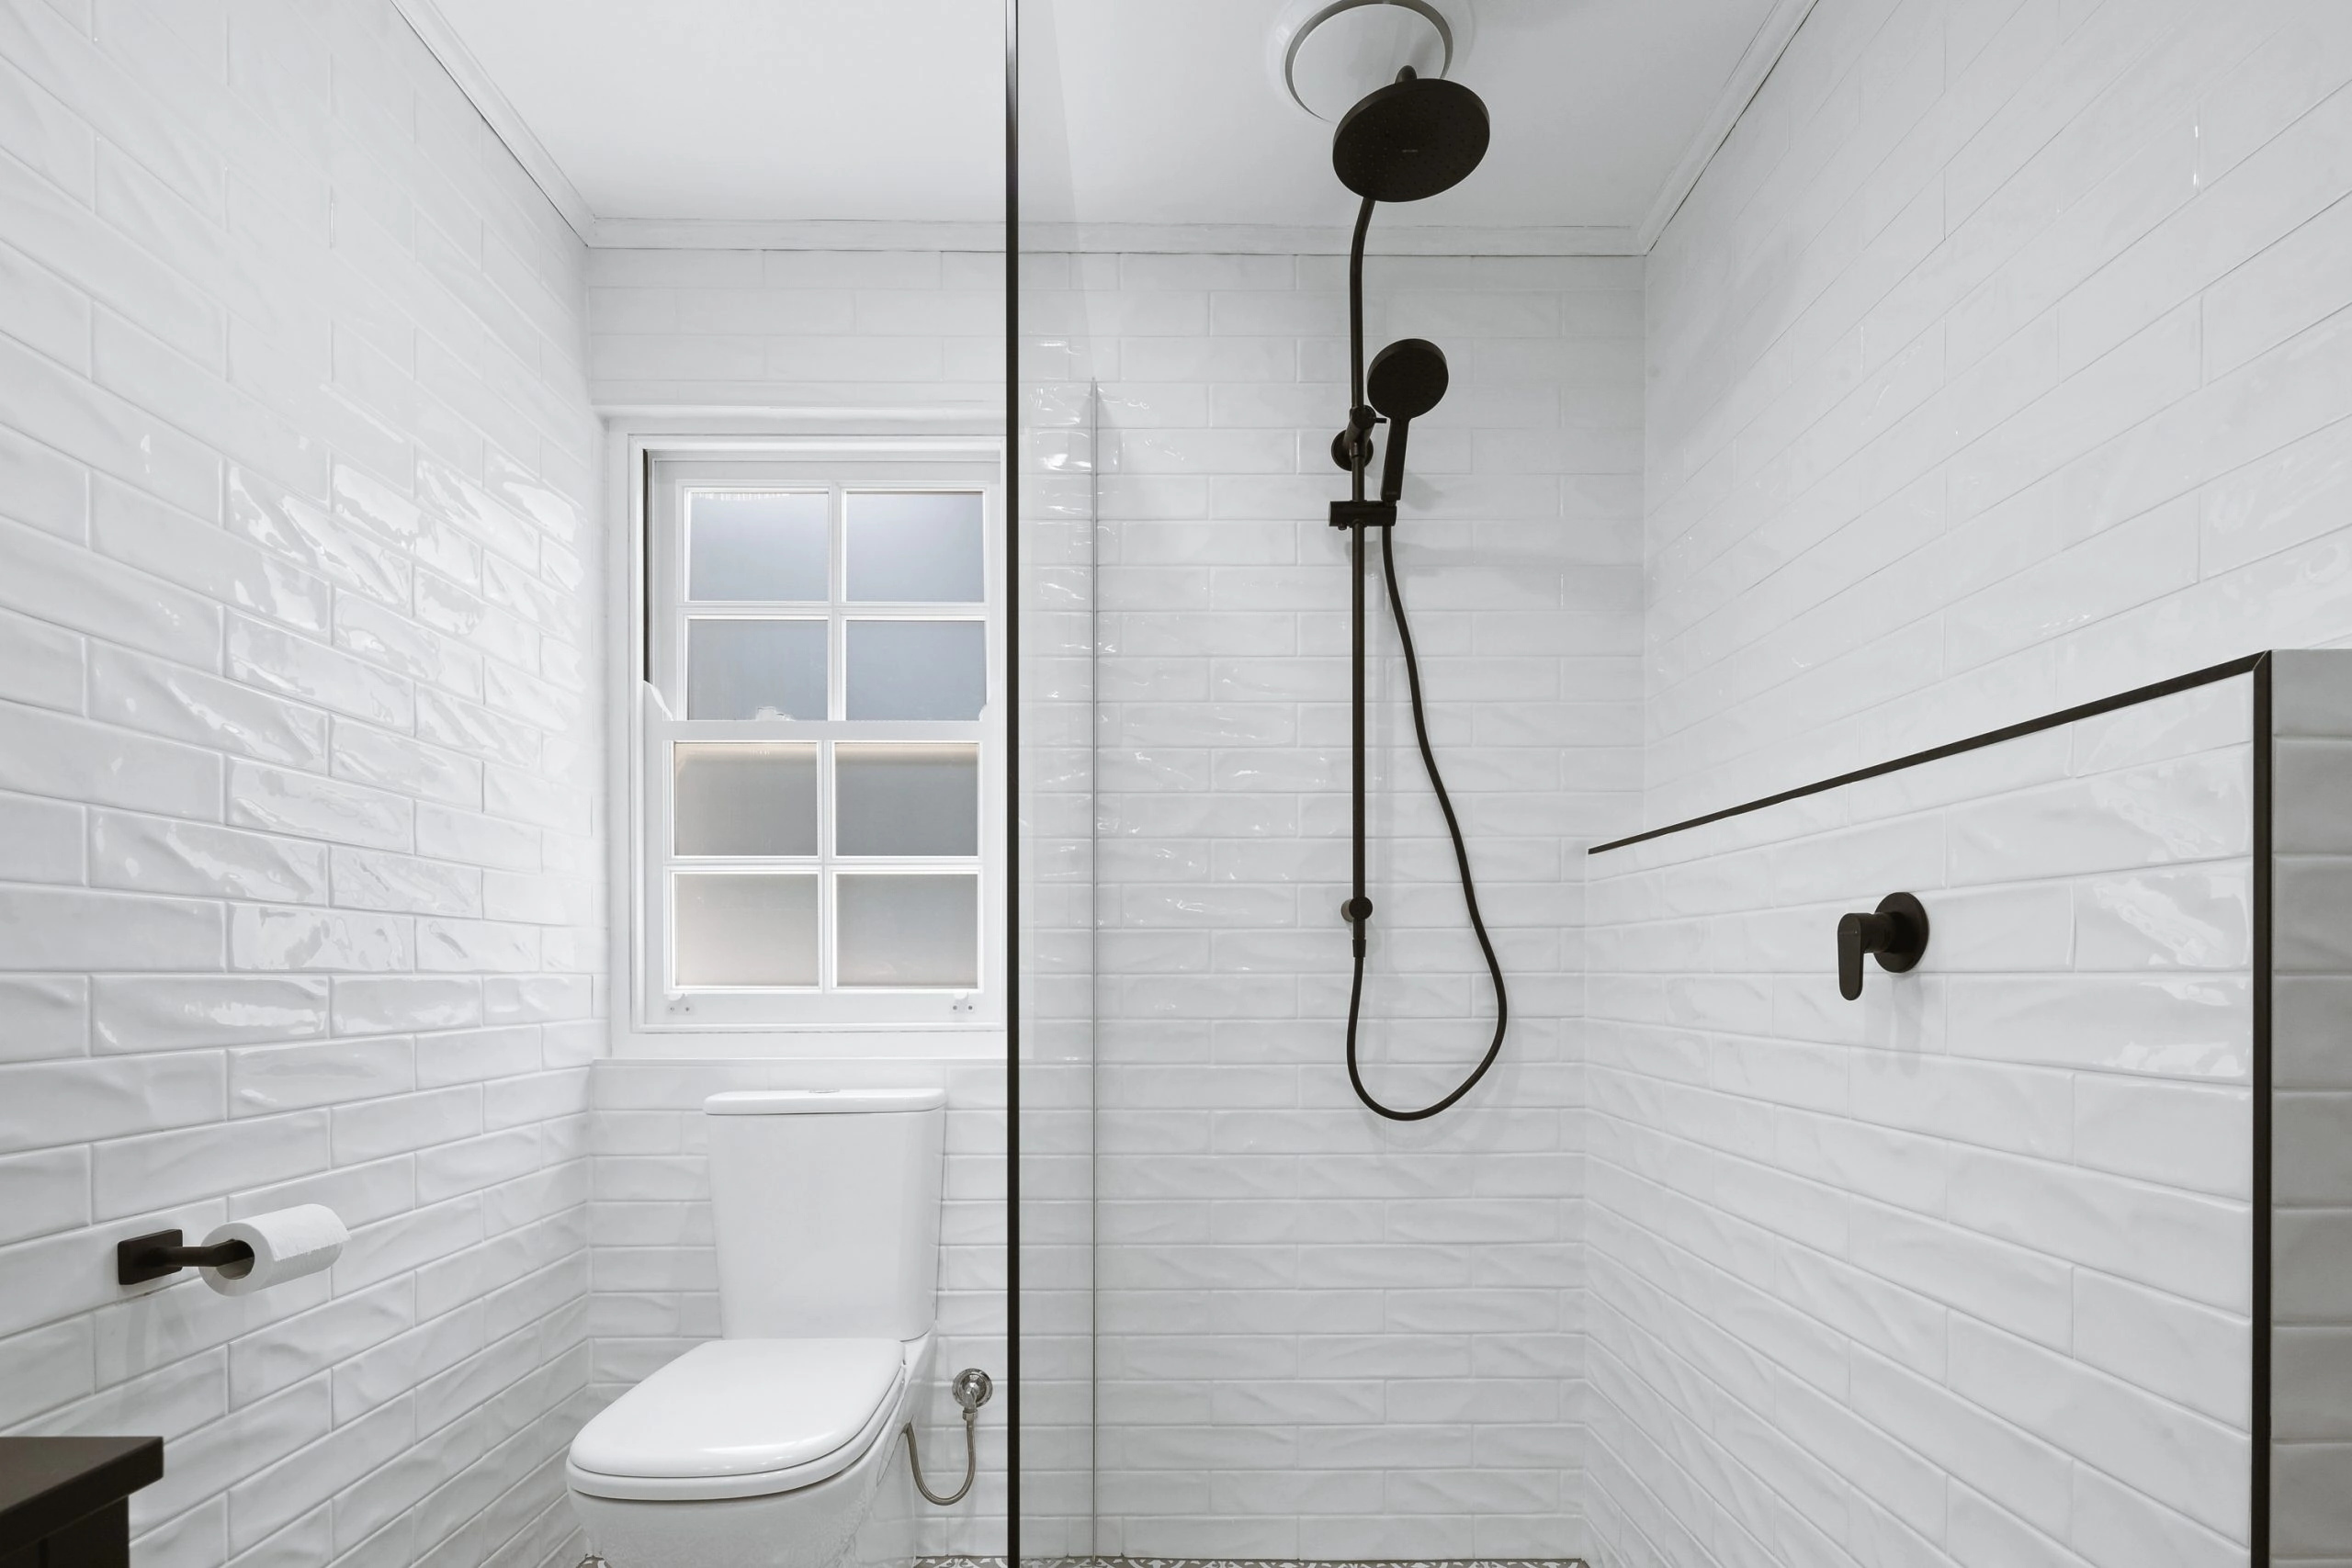 White subway tiled bathroom with black accessories